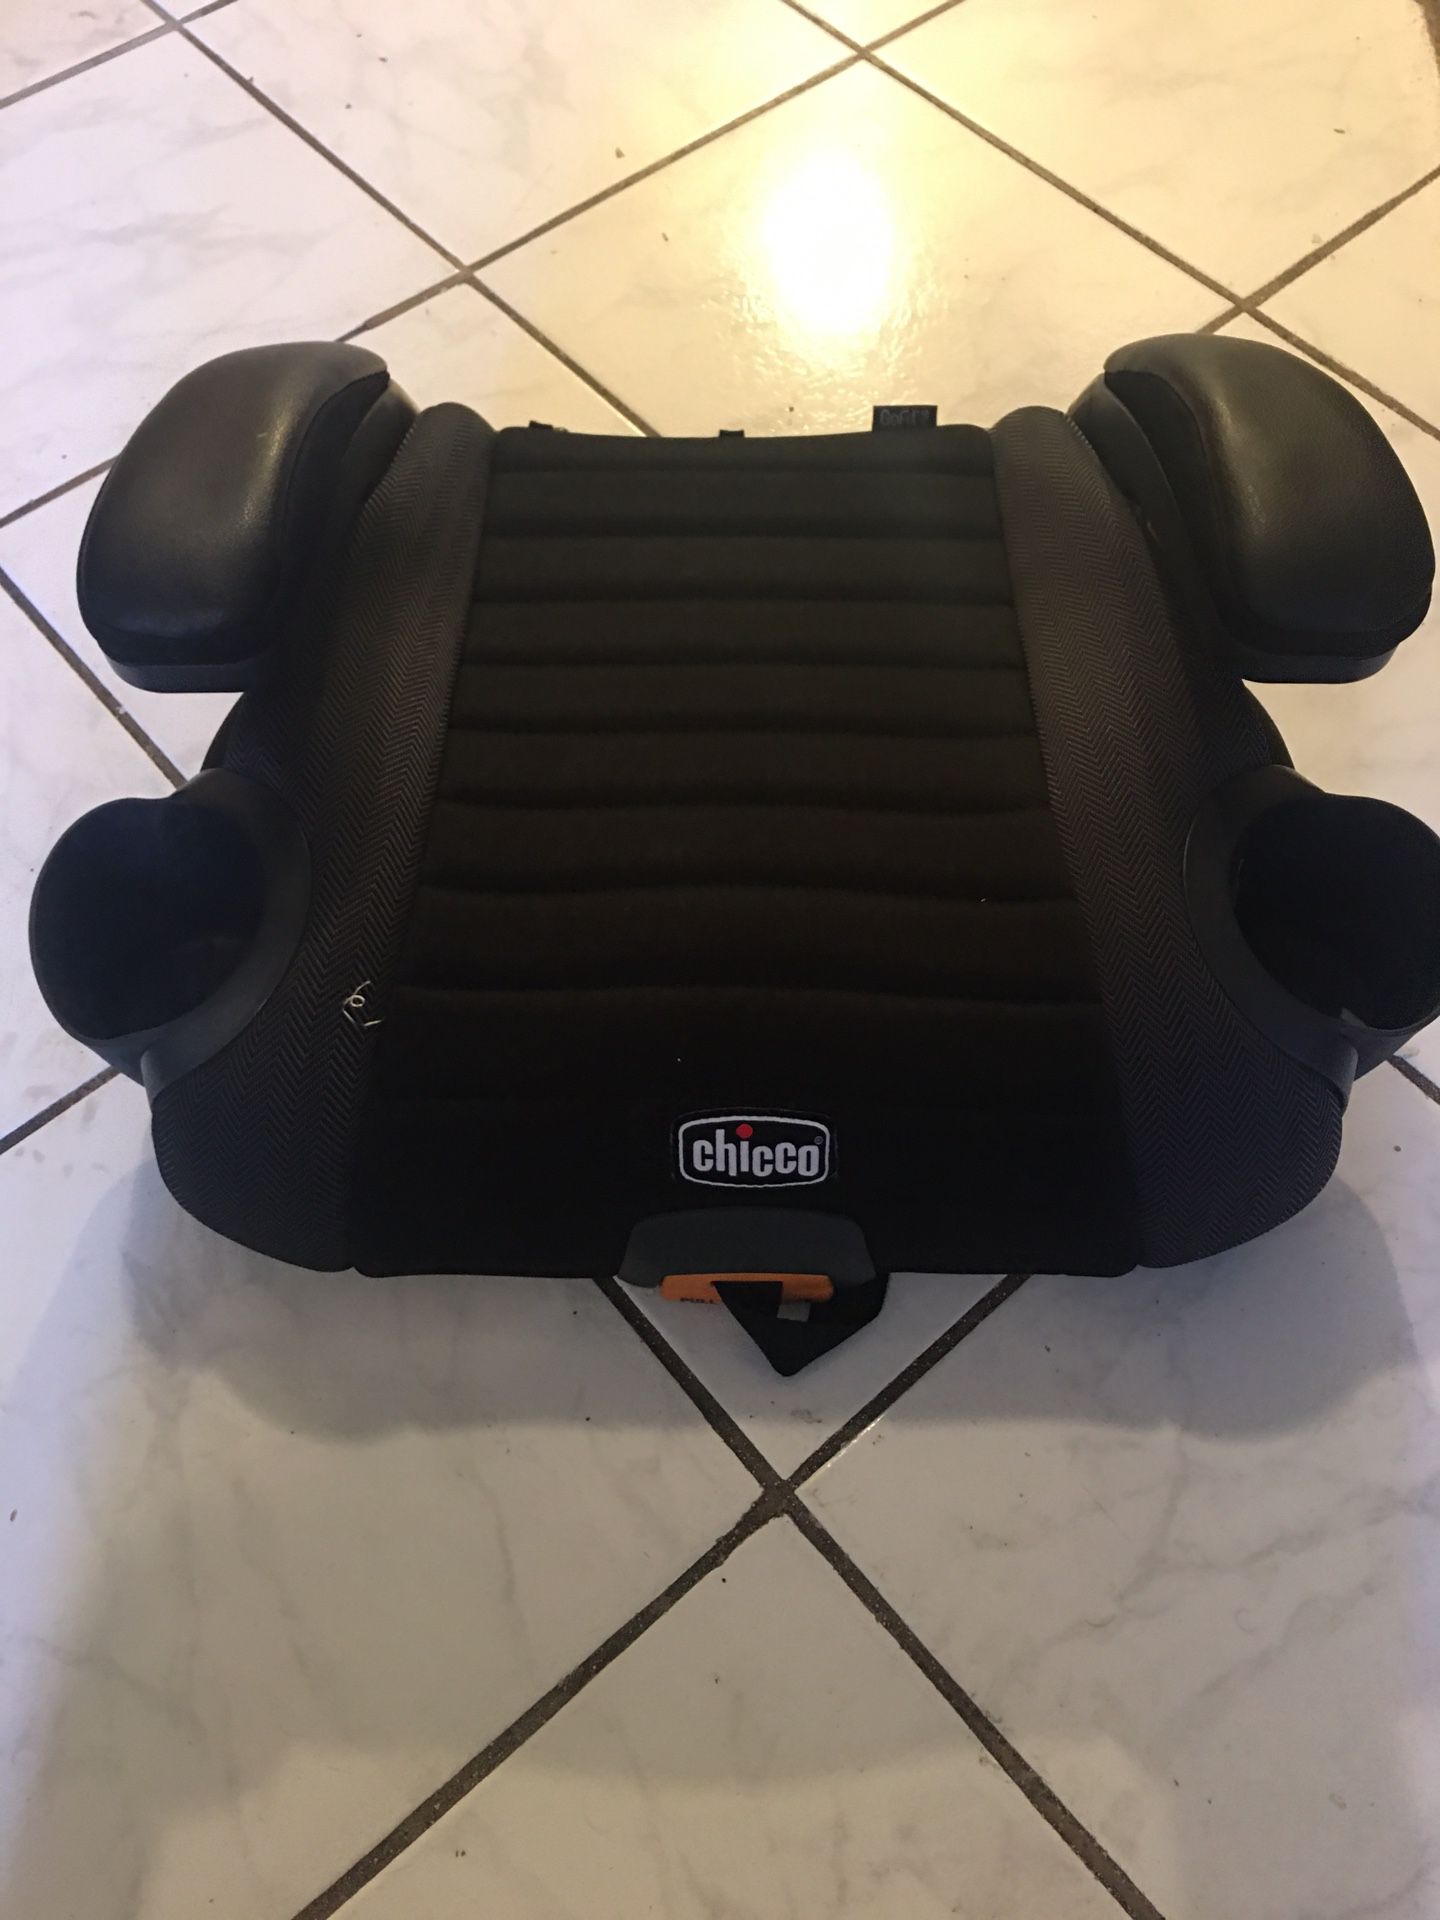 Chico booster car seat